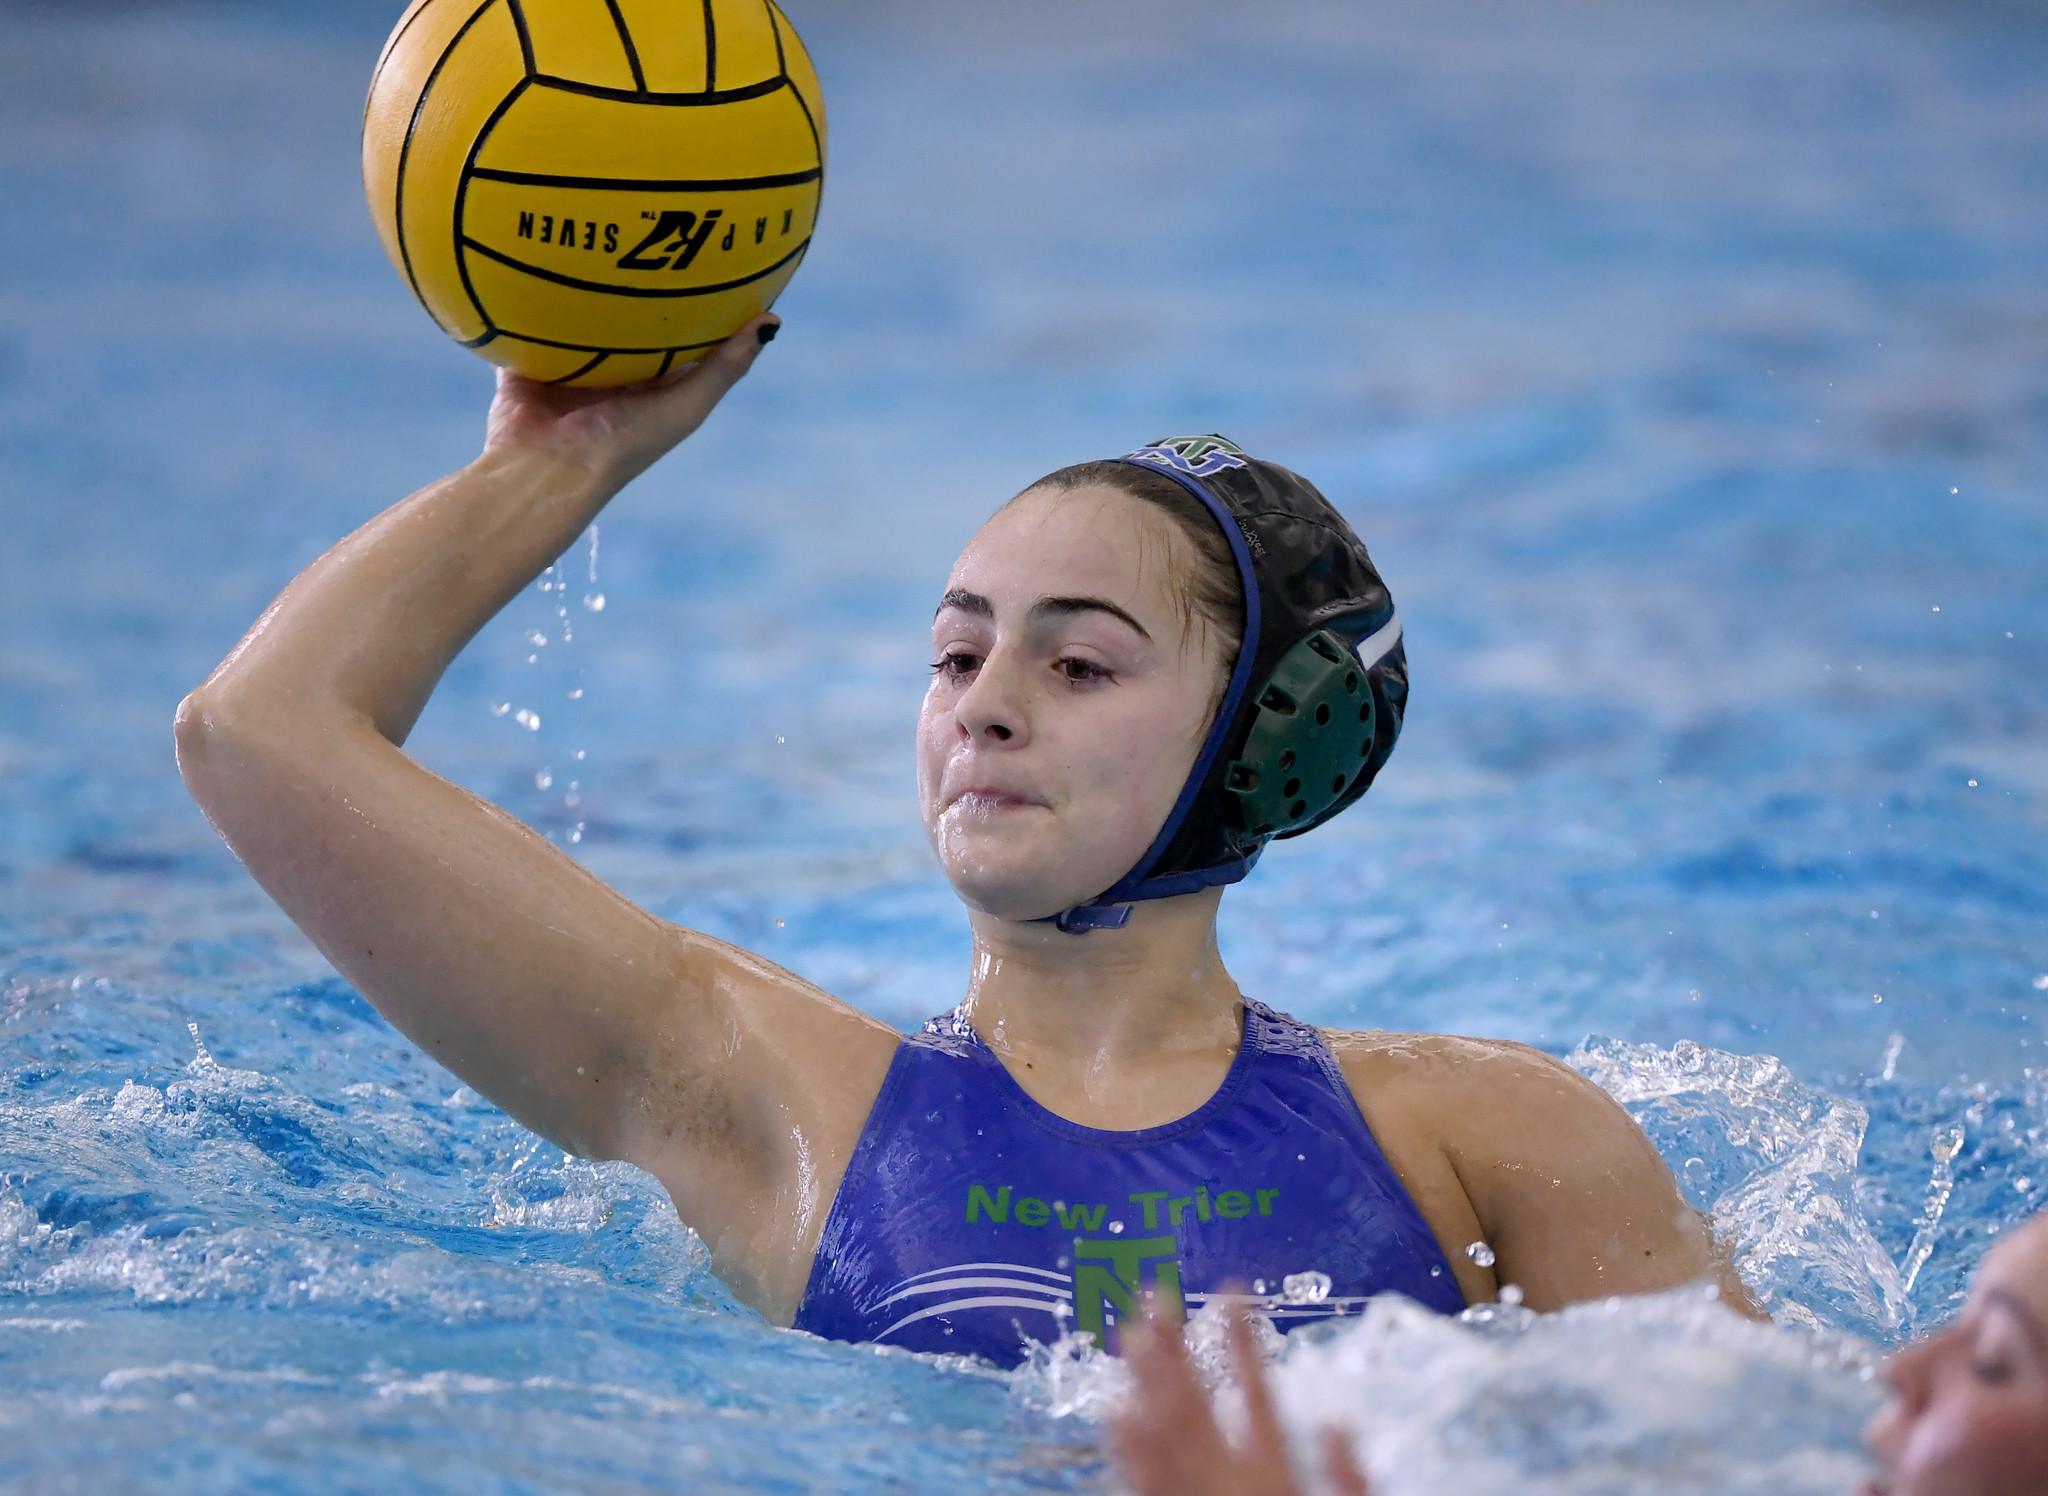 New Trier's Sarah Caywood shows fervent commitment to water polo ...